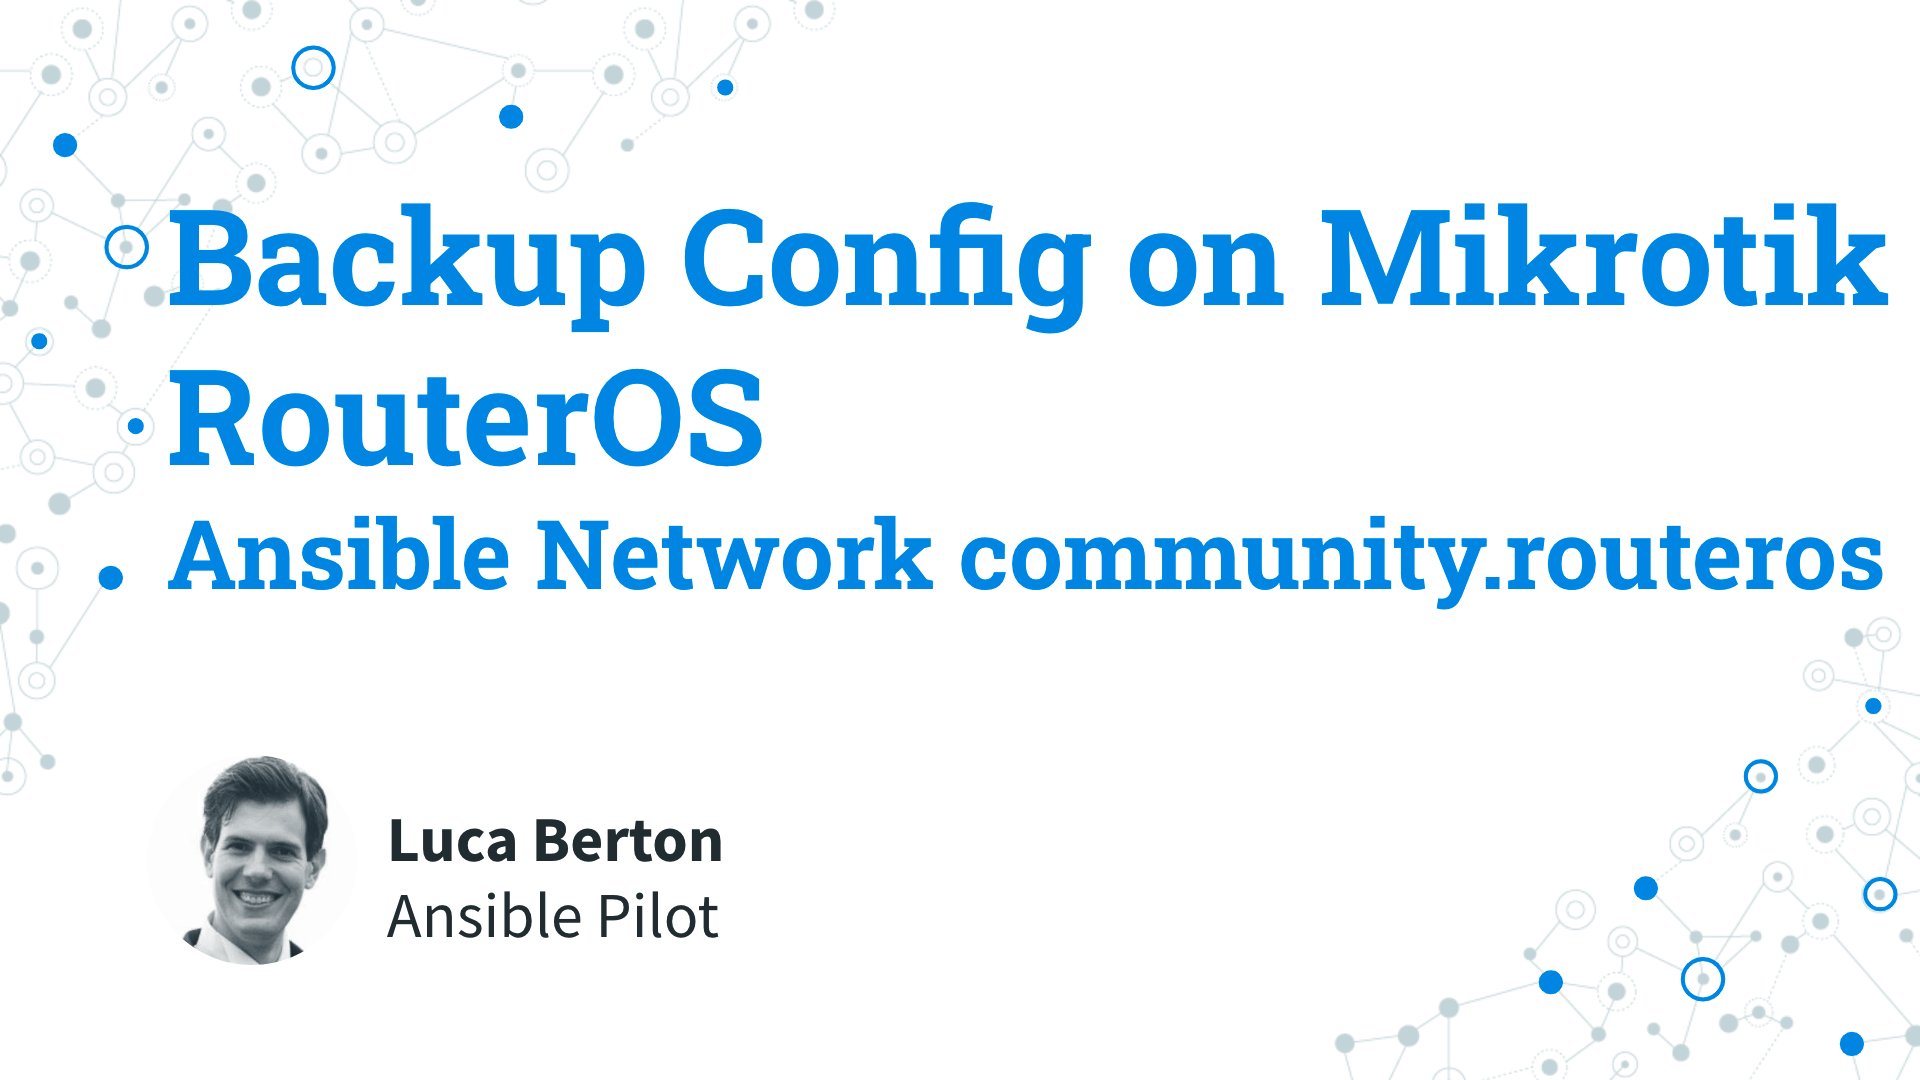 Backup Config on Mikrotik RouterOS - Ansible Network community.routeros